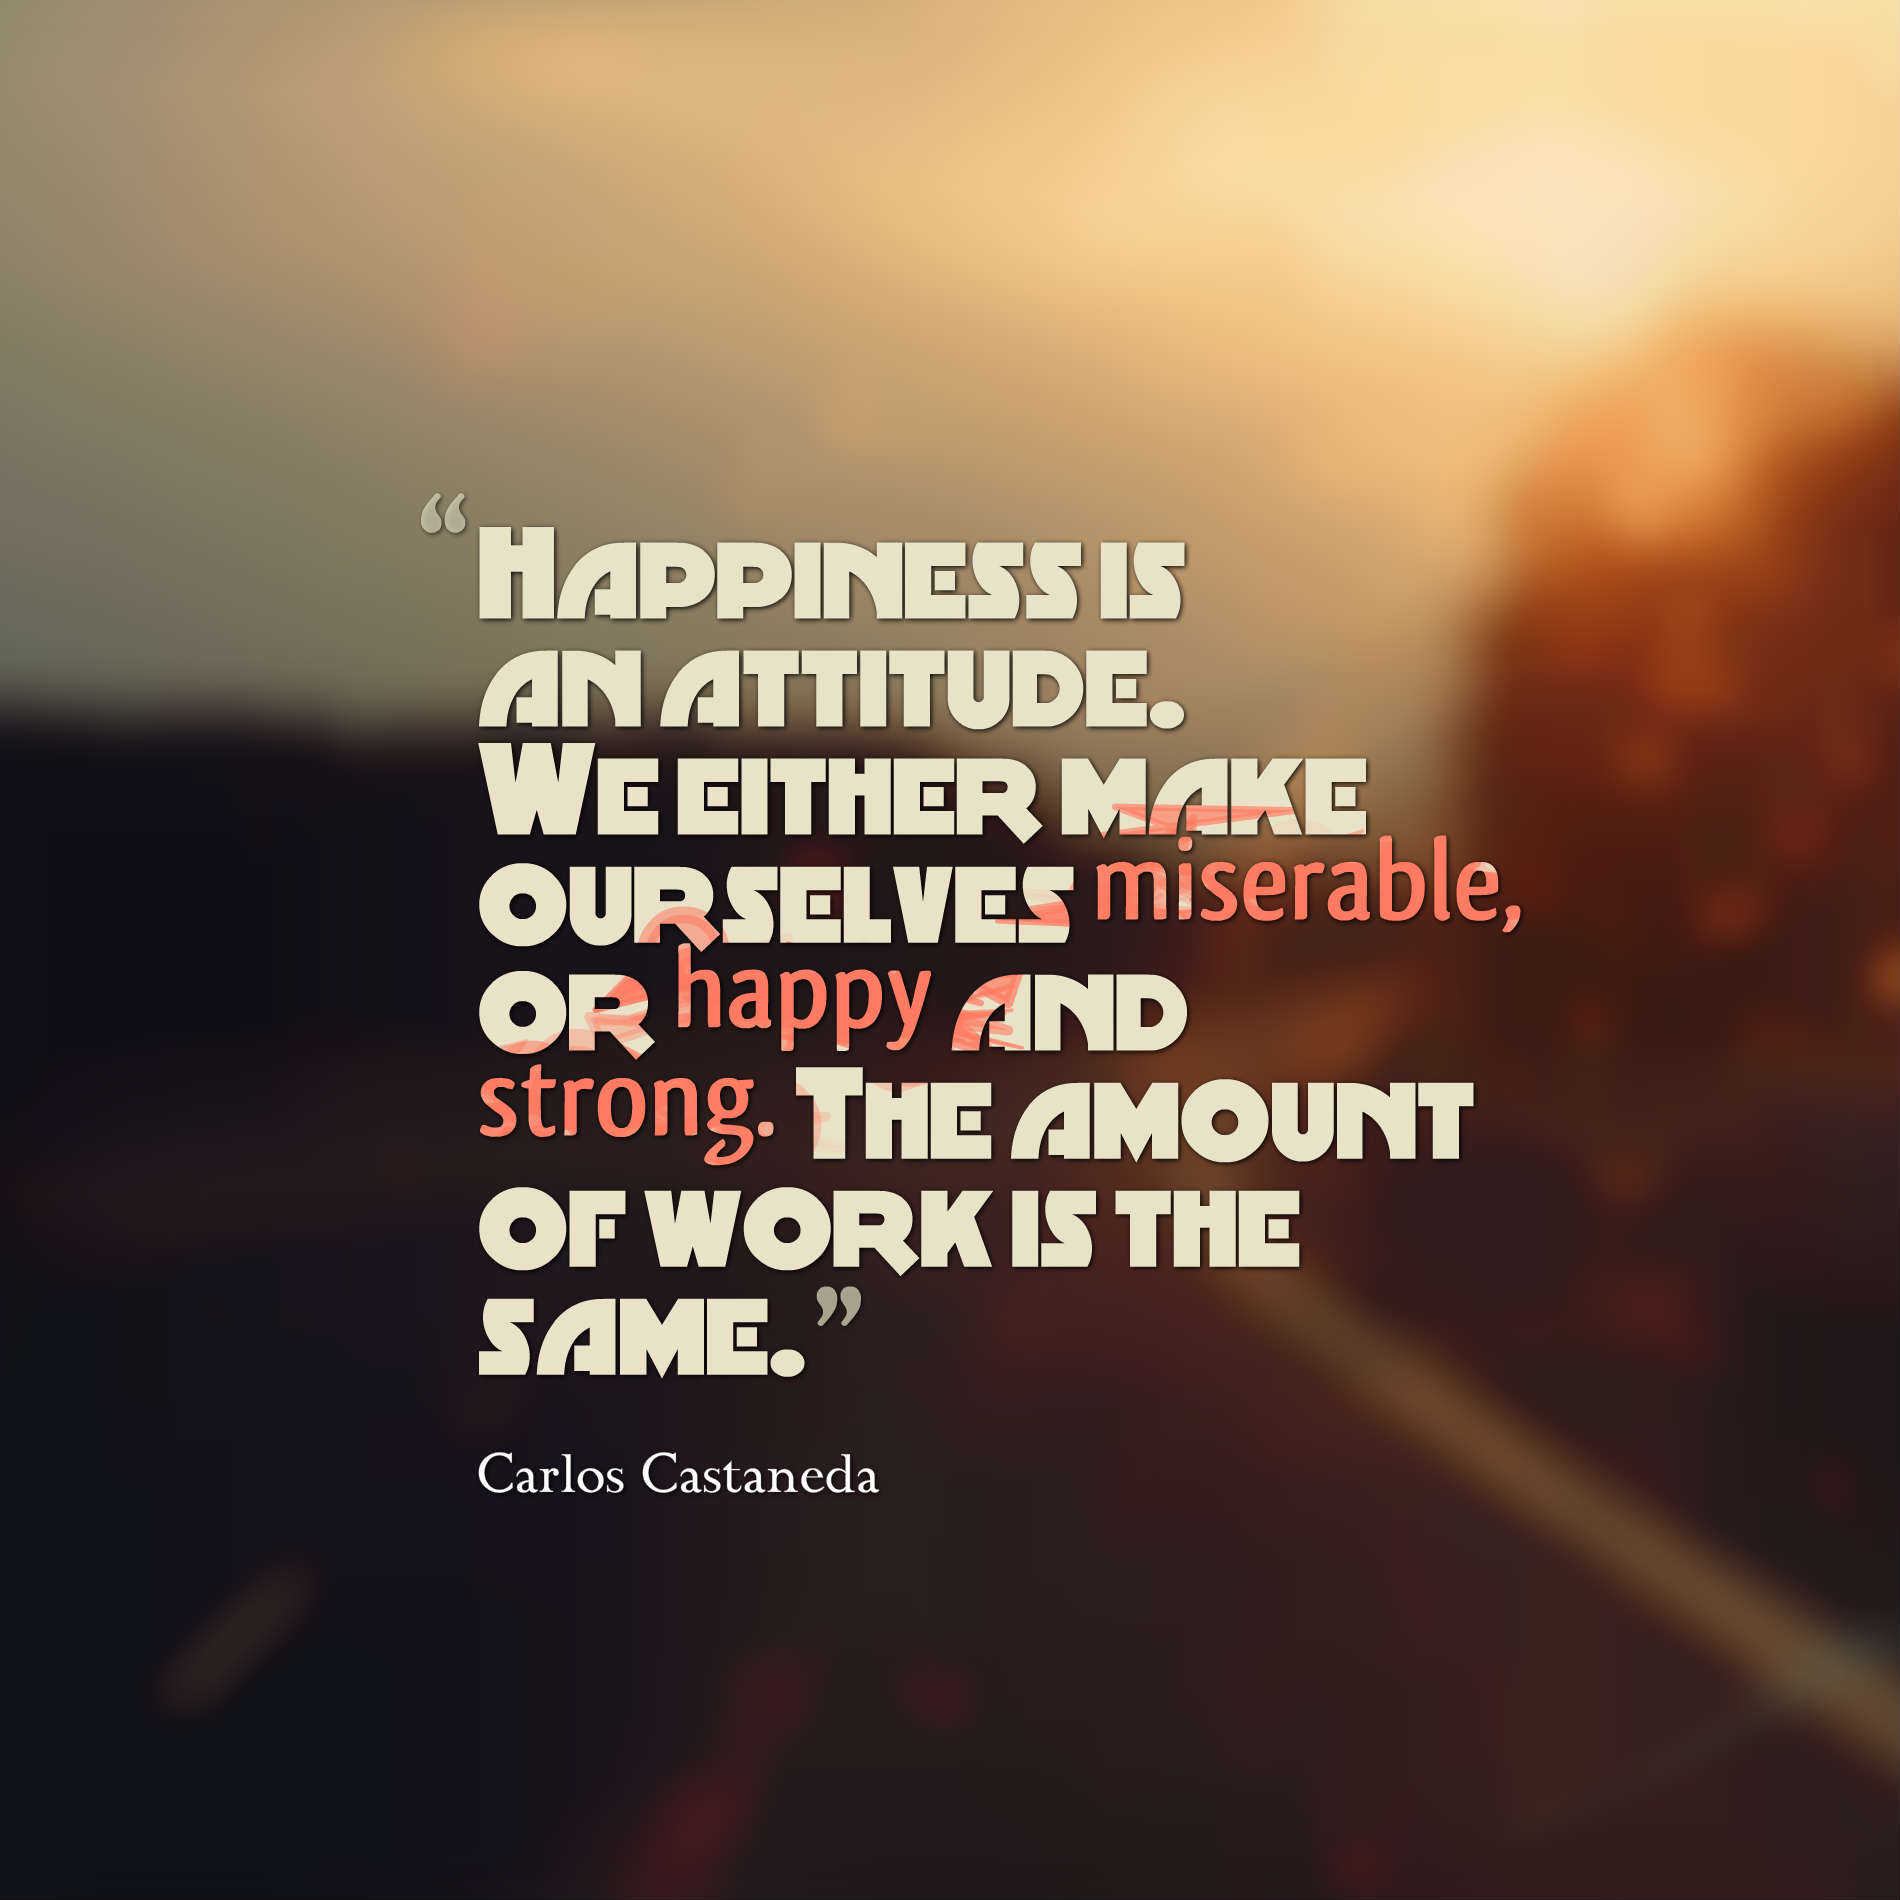 Happiness is an attitude. we either make ourselves miserable, or happy and strong. The amoutn of work is the same. Carlos Castaneda